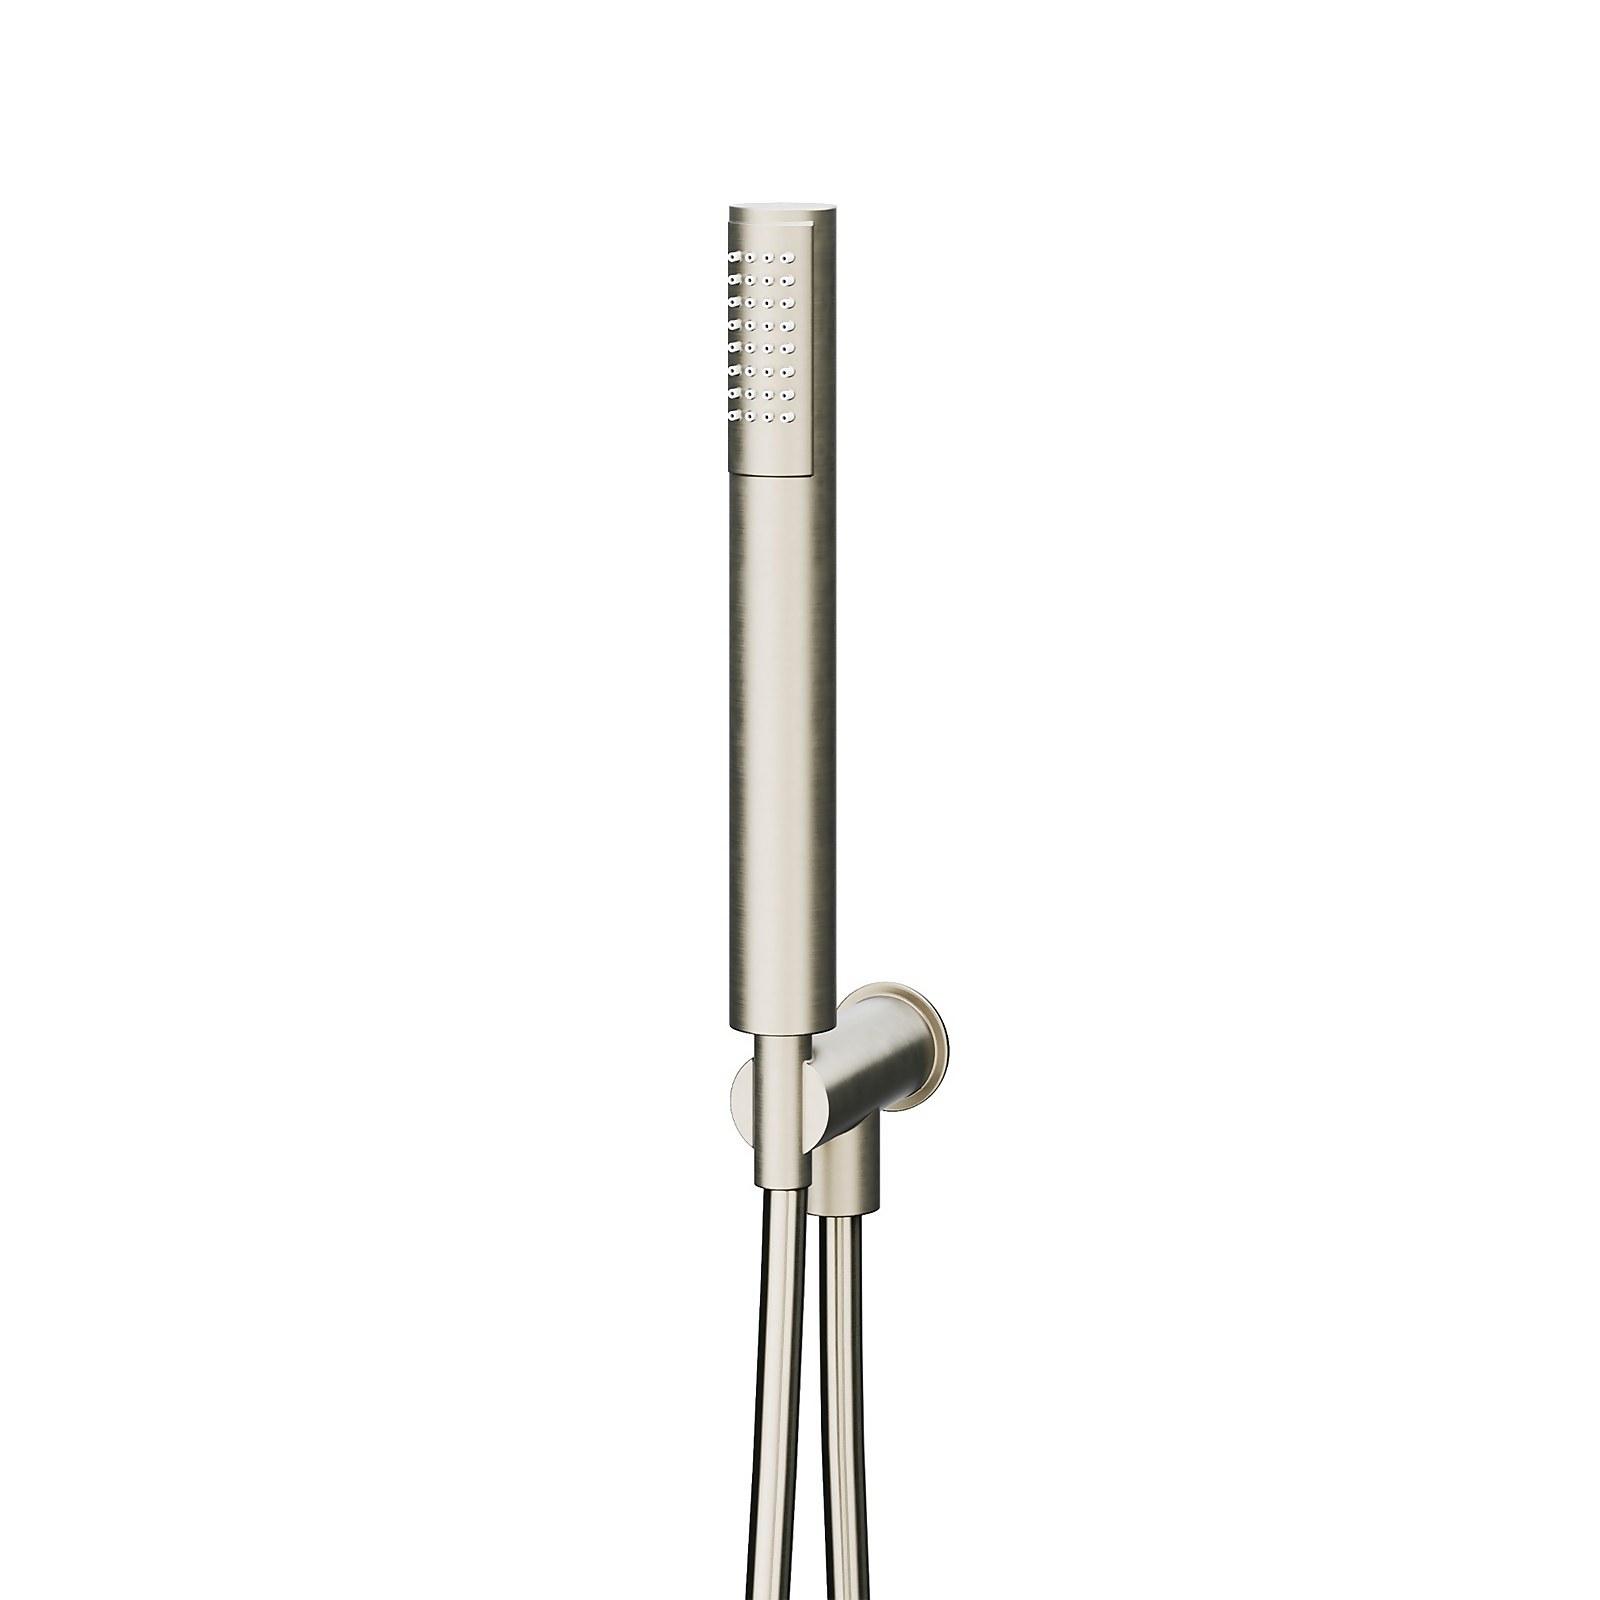 Photo of Shower Handset- With Hose- Wall Outlet And Holder - Brushed Nickel Finish